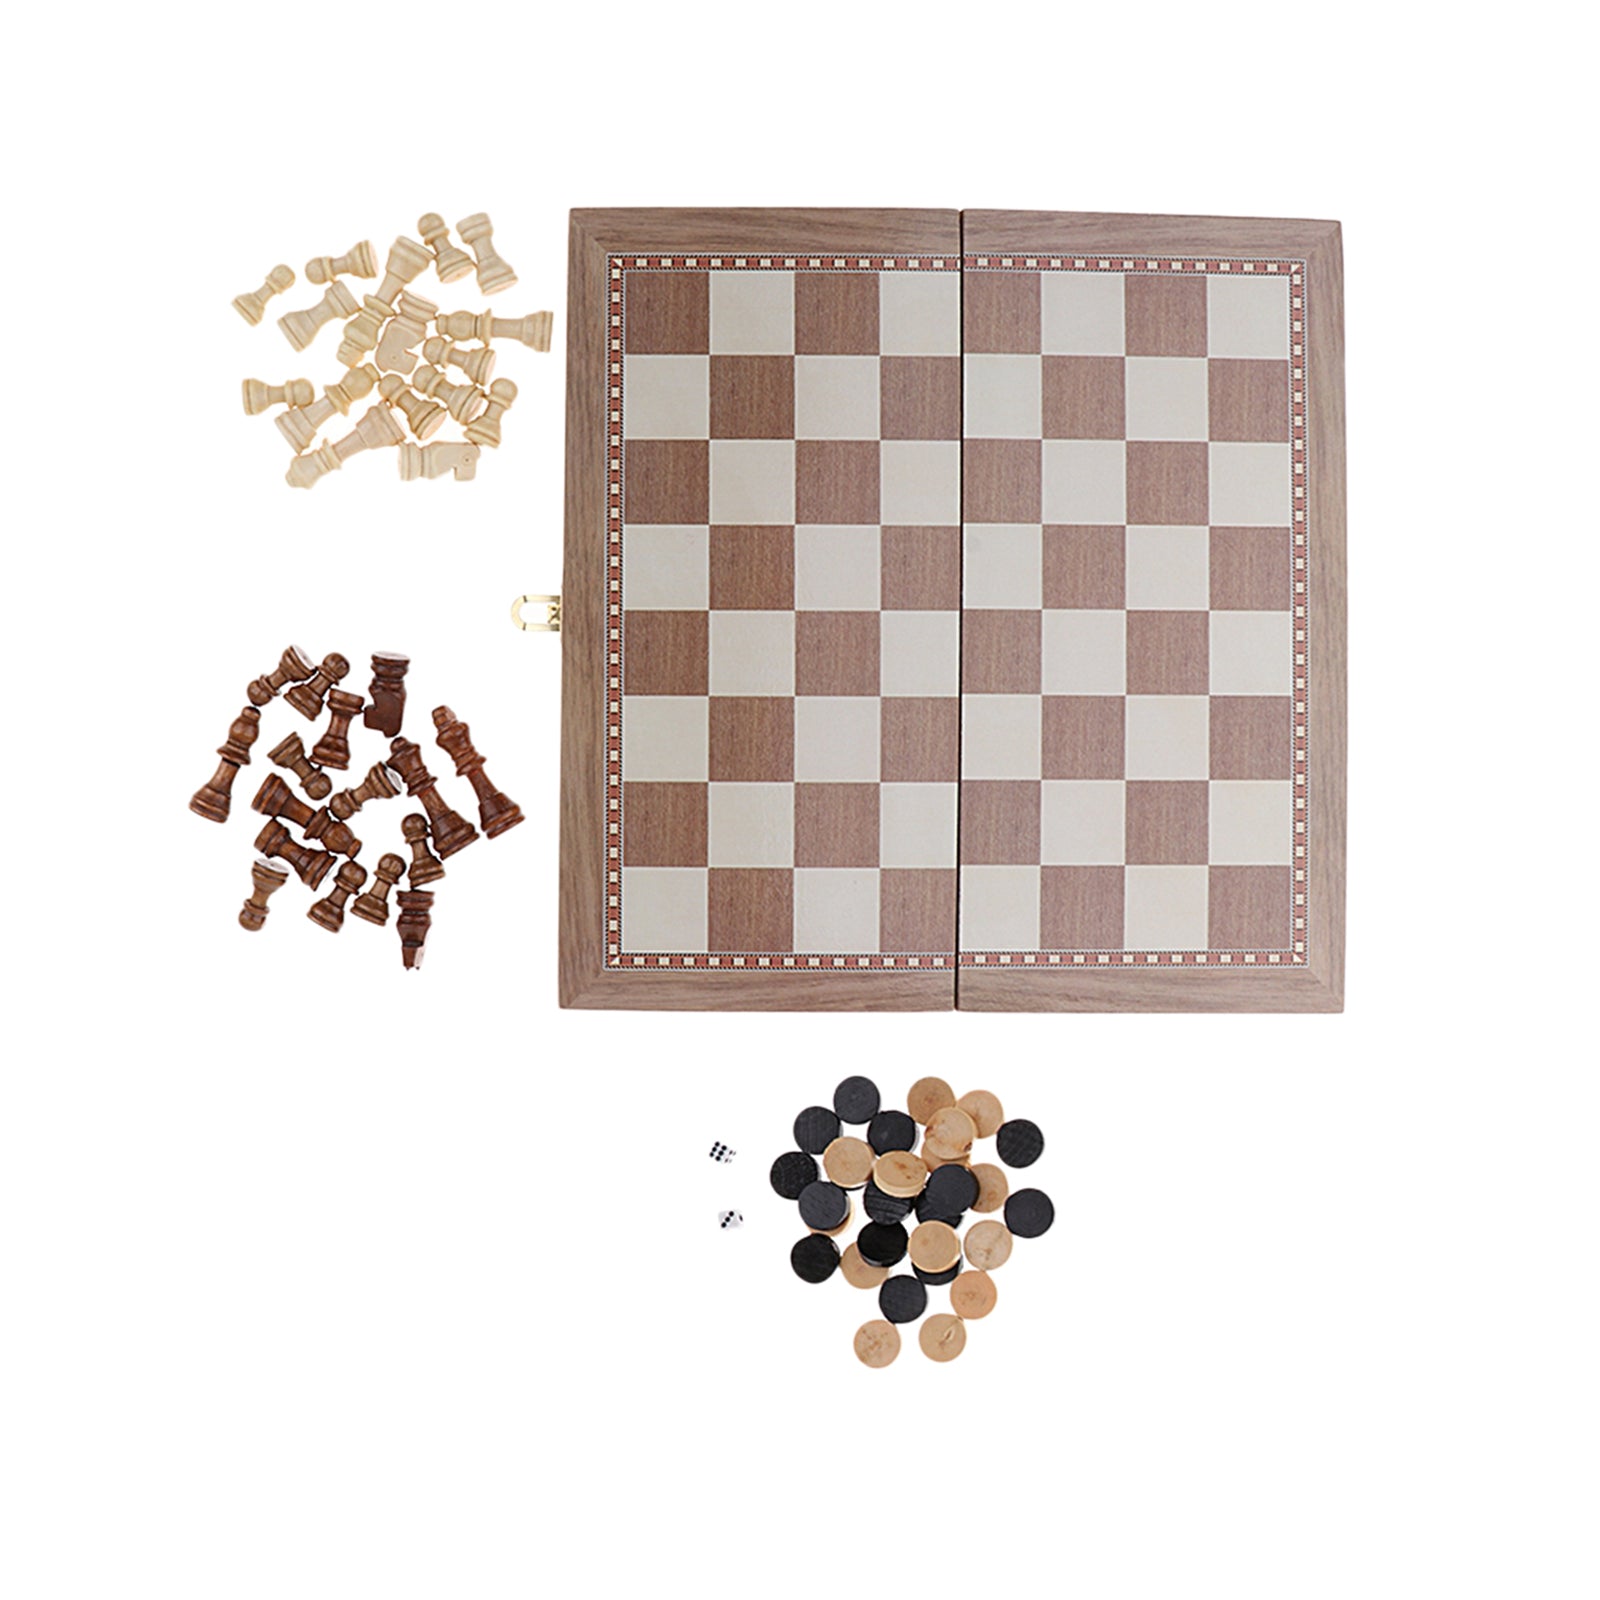 3-in-1 Wooden Folding Chess Board Game Travel Set for Kids Teens Adults Gift